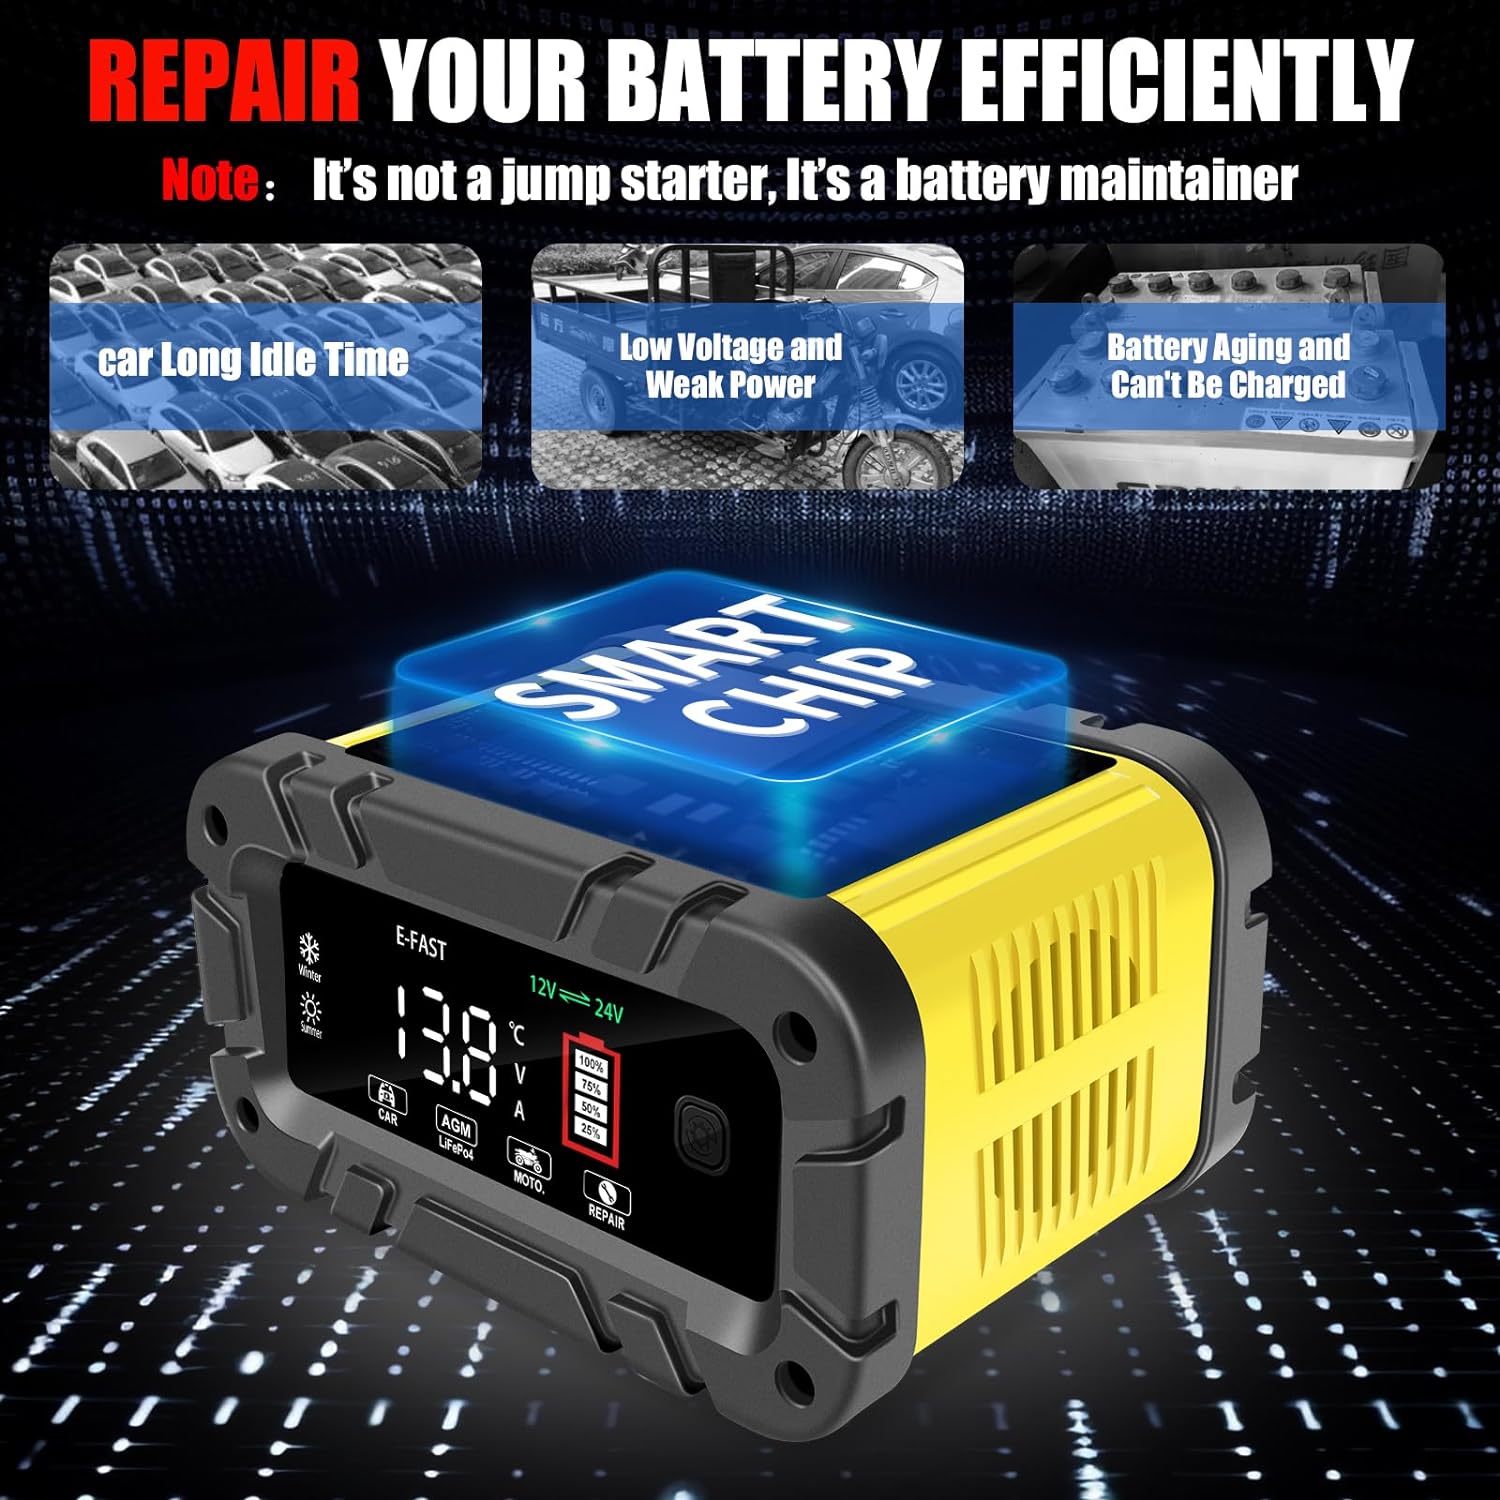 20A Battery Charger,12/24V Lifepo4 Lead Acid Car Battery Chargers, Upgraded Automotive Trickle Charger, 7 Stage Battery Maintainer, for Truck Trailer Motorcycle AGM Lawn Mower Boat Marine Batteries - 20A Battery Charger Review